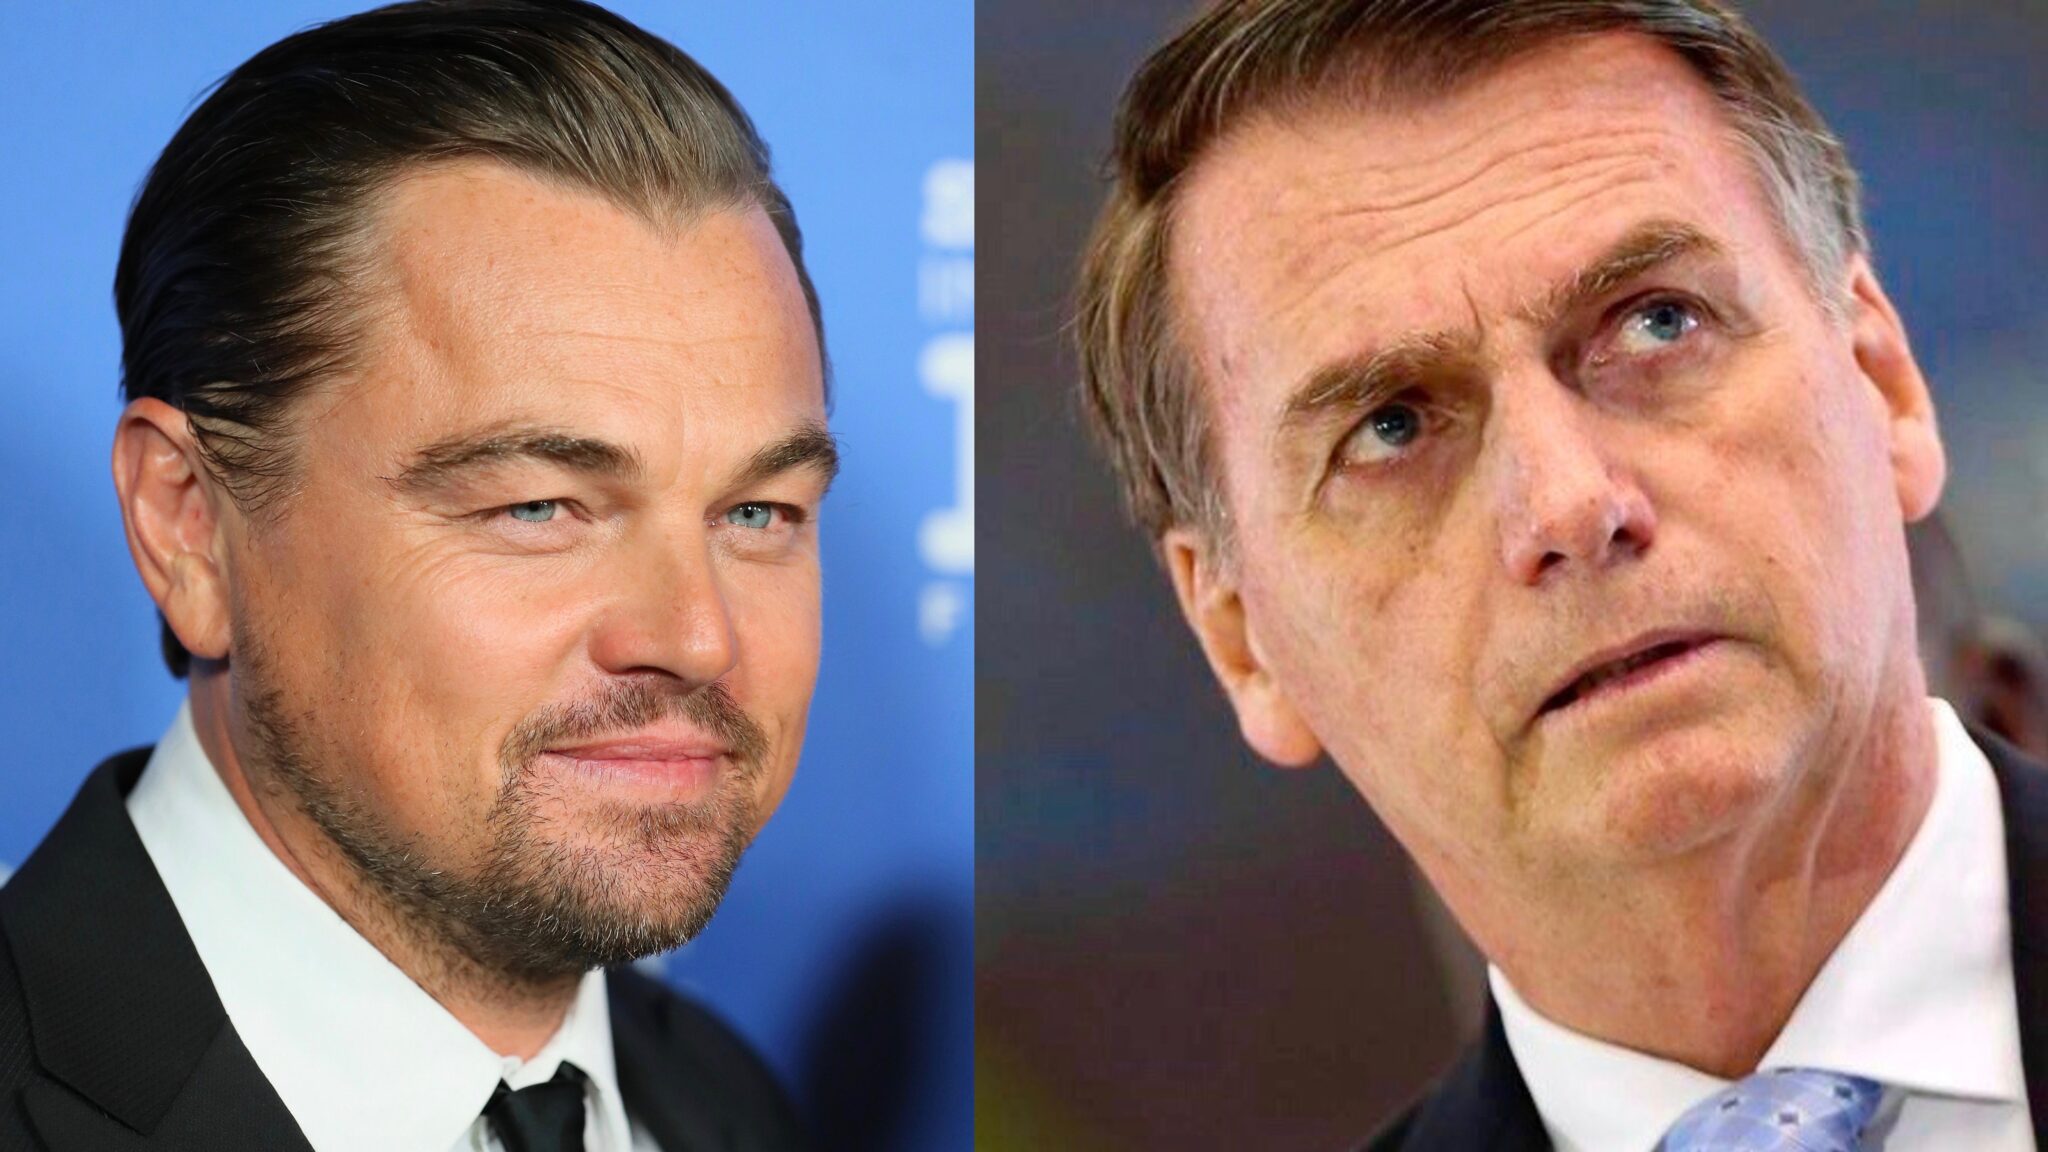 DiCaprio Responds After Brazil’s Bolsonaro Claims He Is Contributing to Amazon Fires